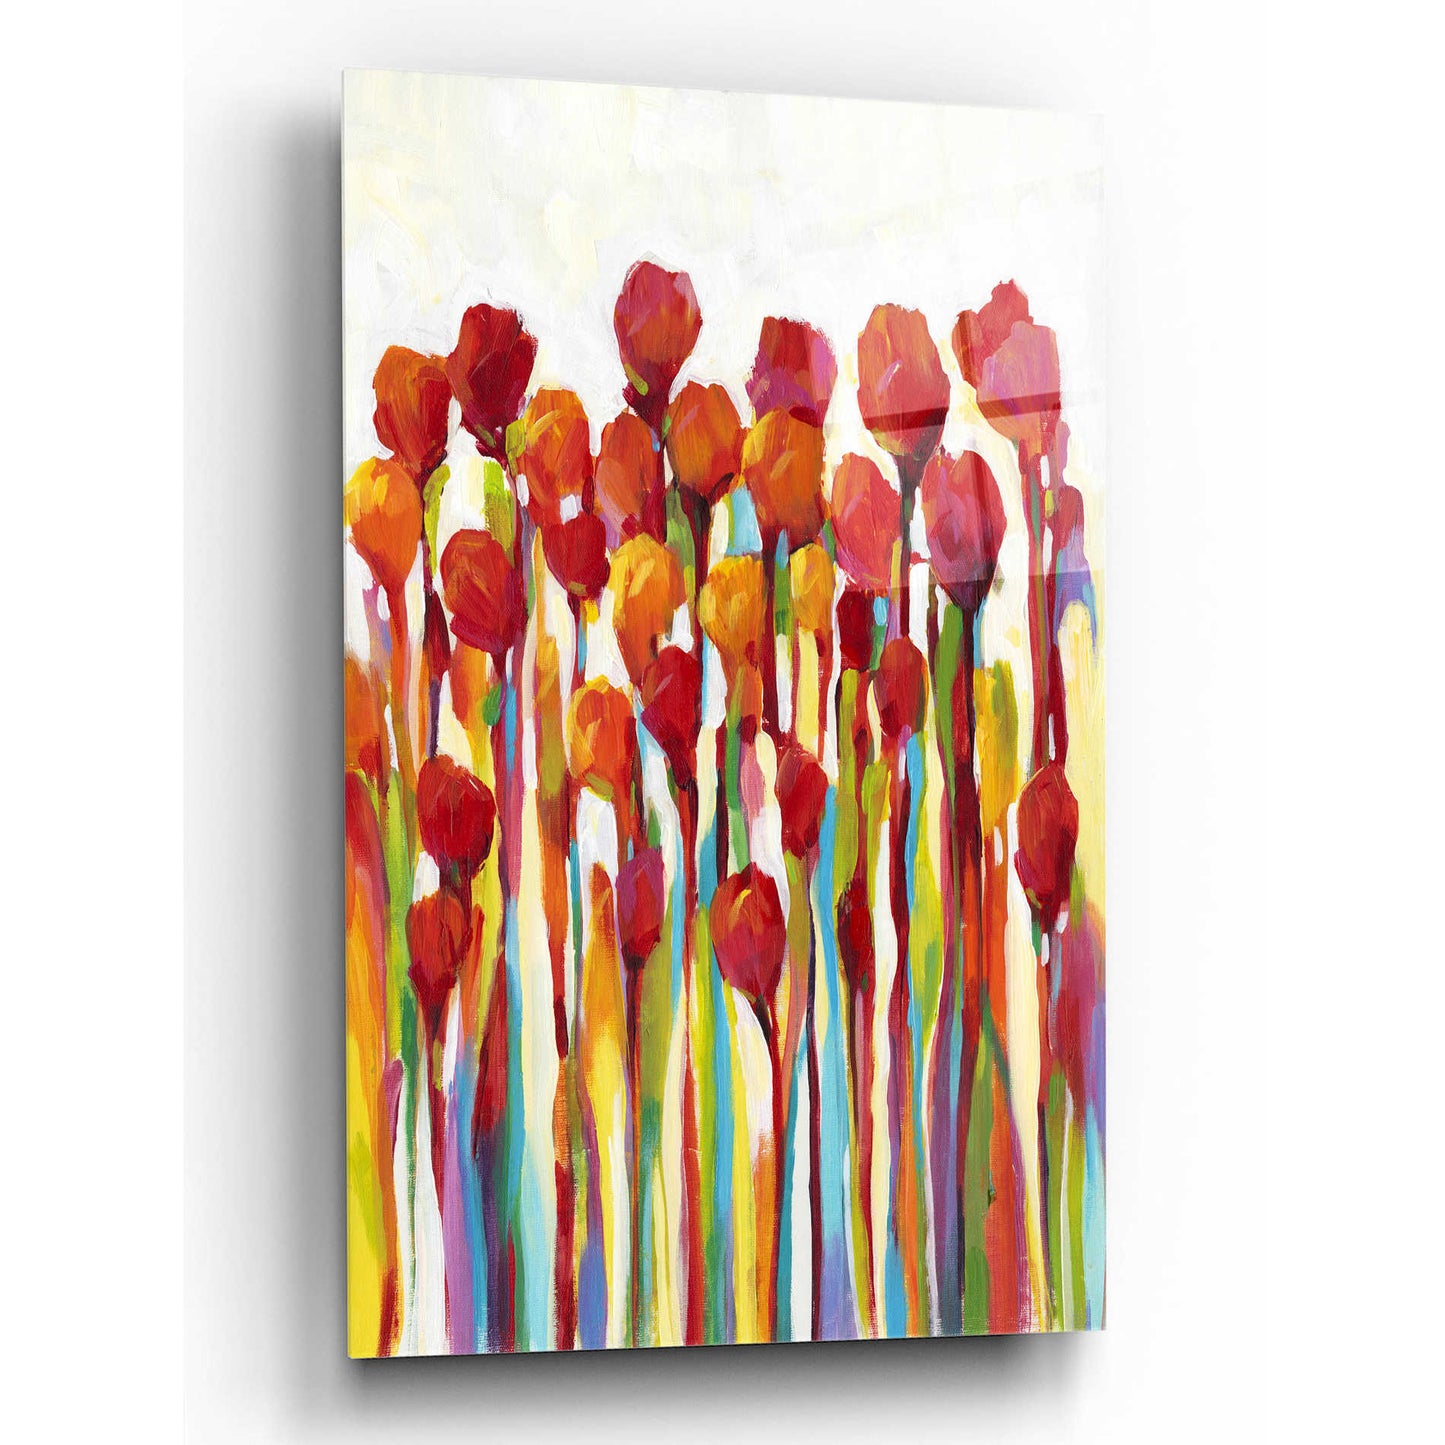 Epic Art 'Bursting with Color I' by Tim O'Toole, Acrylic Glass Wall Art,12x16